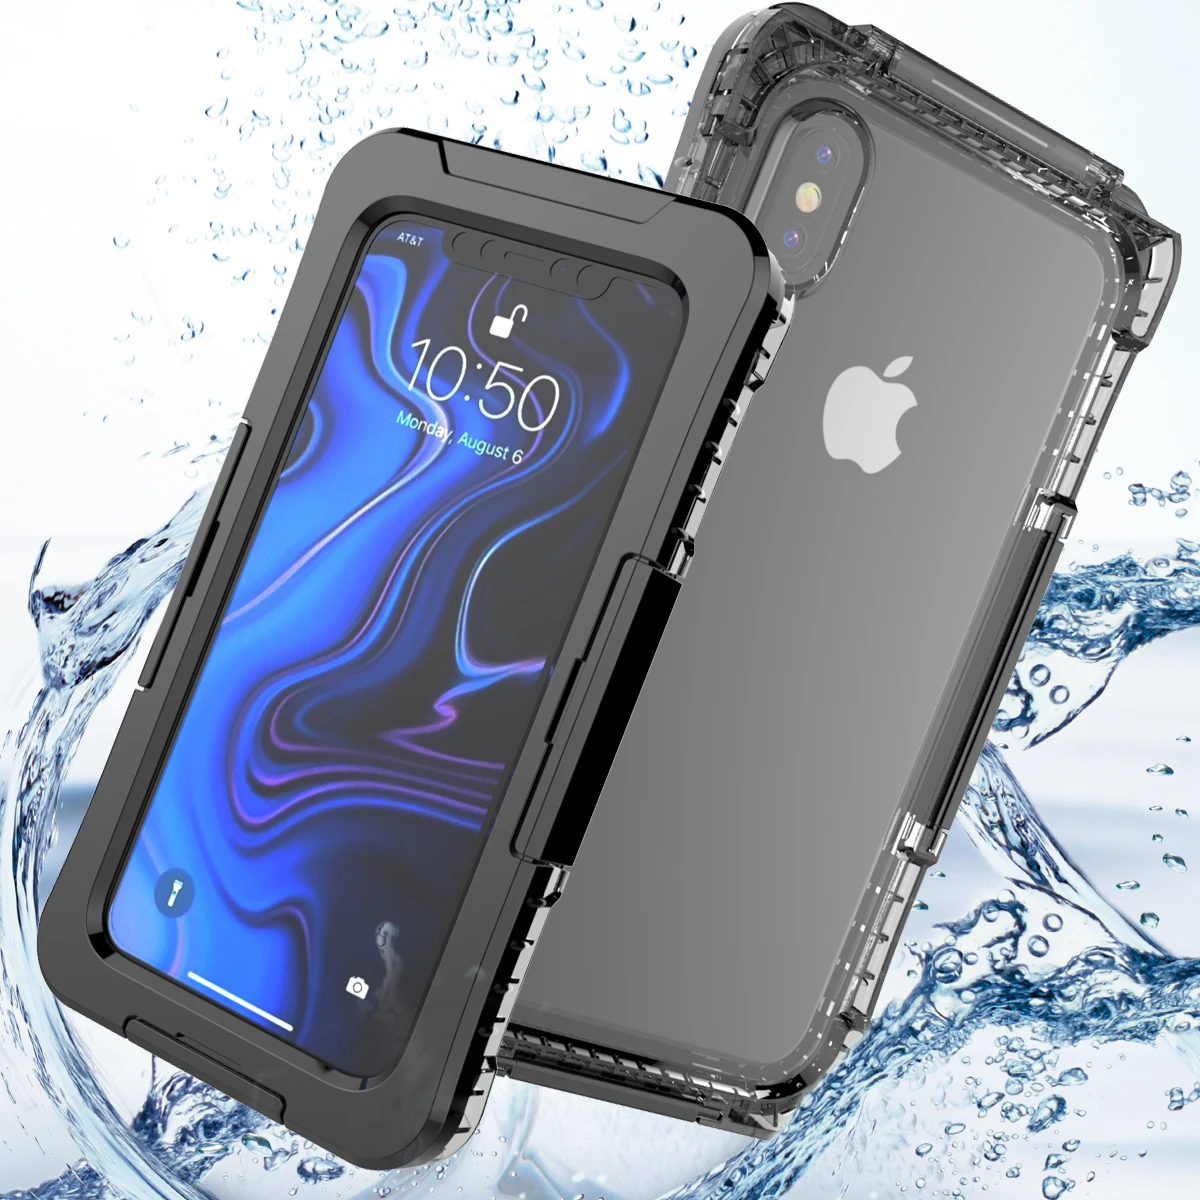 IP68 Coque For iPhone X XS Max Waterproof Case Shockproof Anti-fall Dust-proof Swimming Cover 6S 7 8 Plus 5 SE 5S | Мобильные